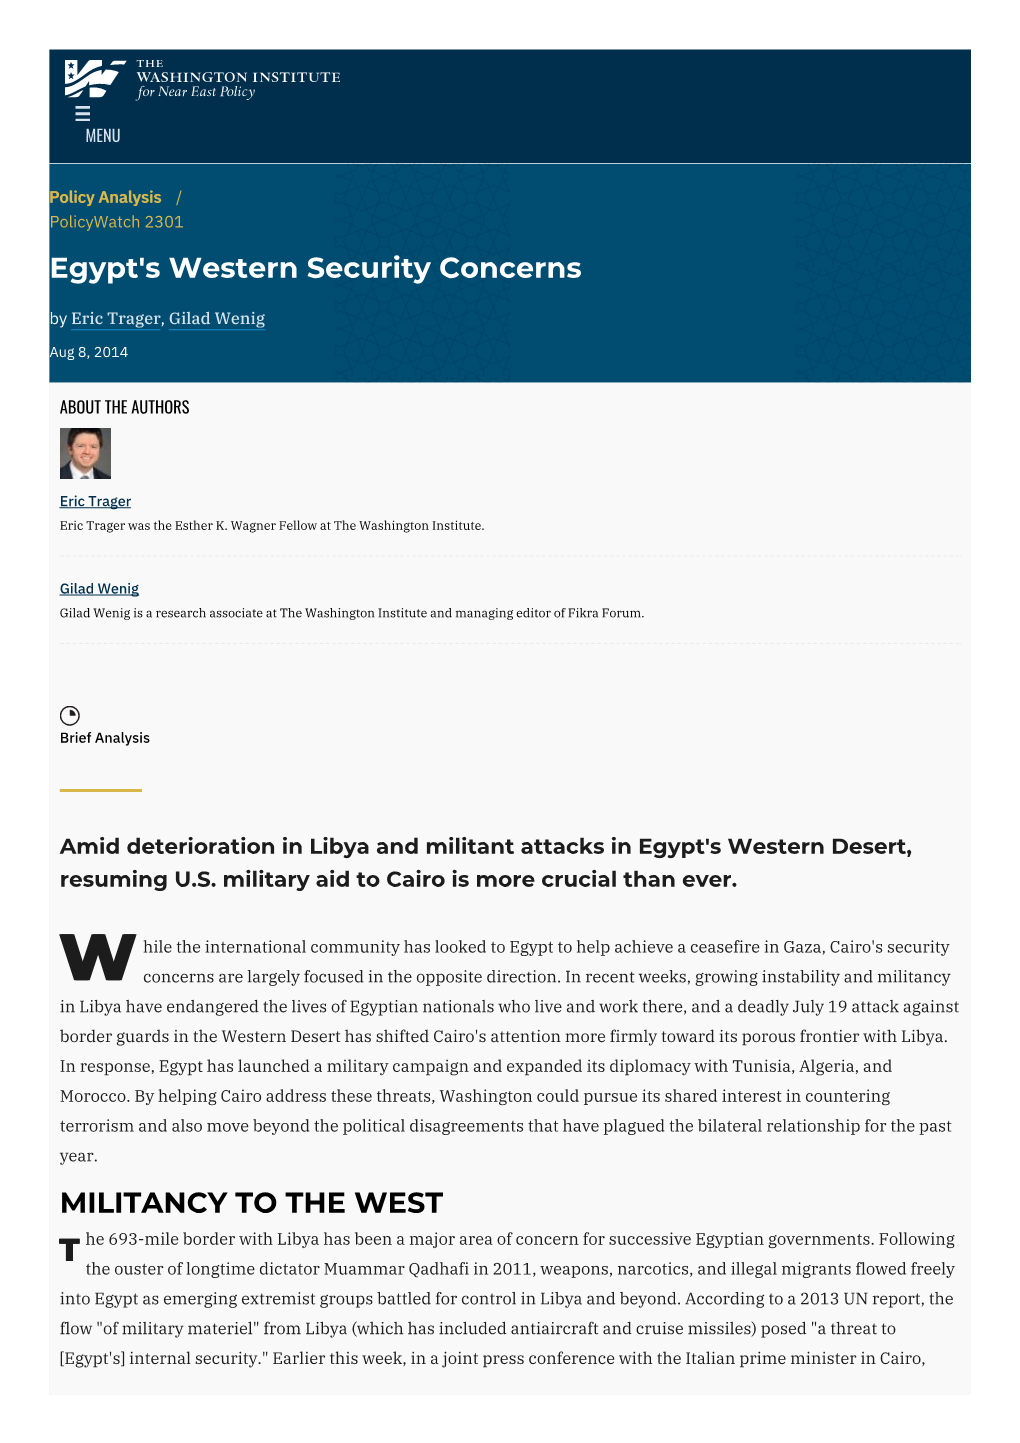 Egypt's Western Security Concerns | the Washington Institute